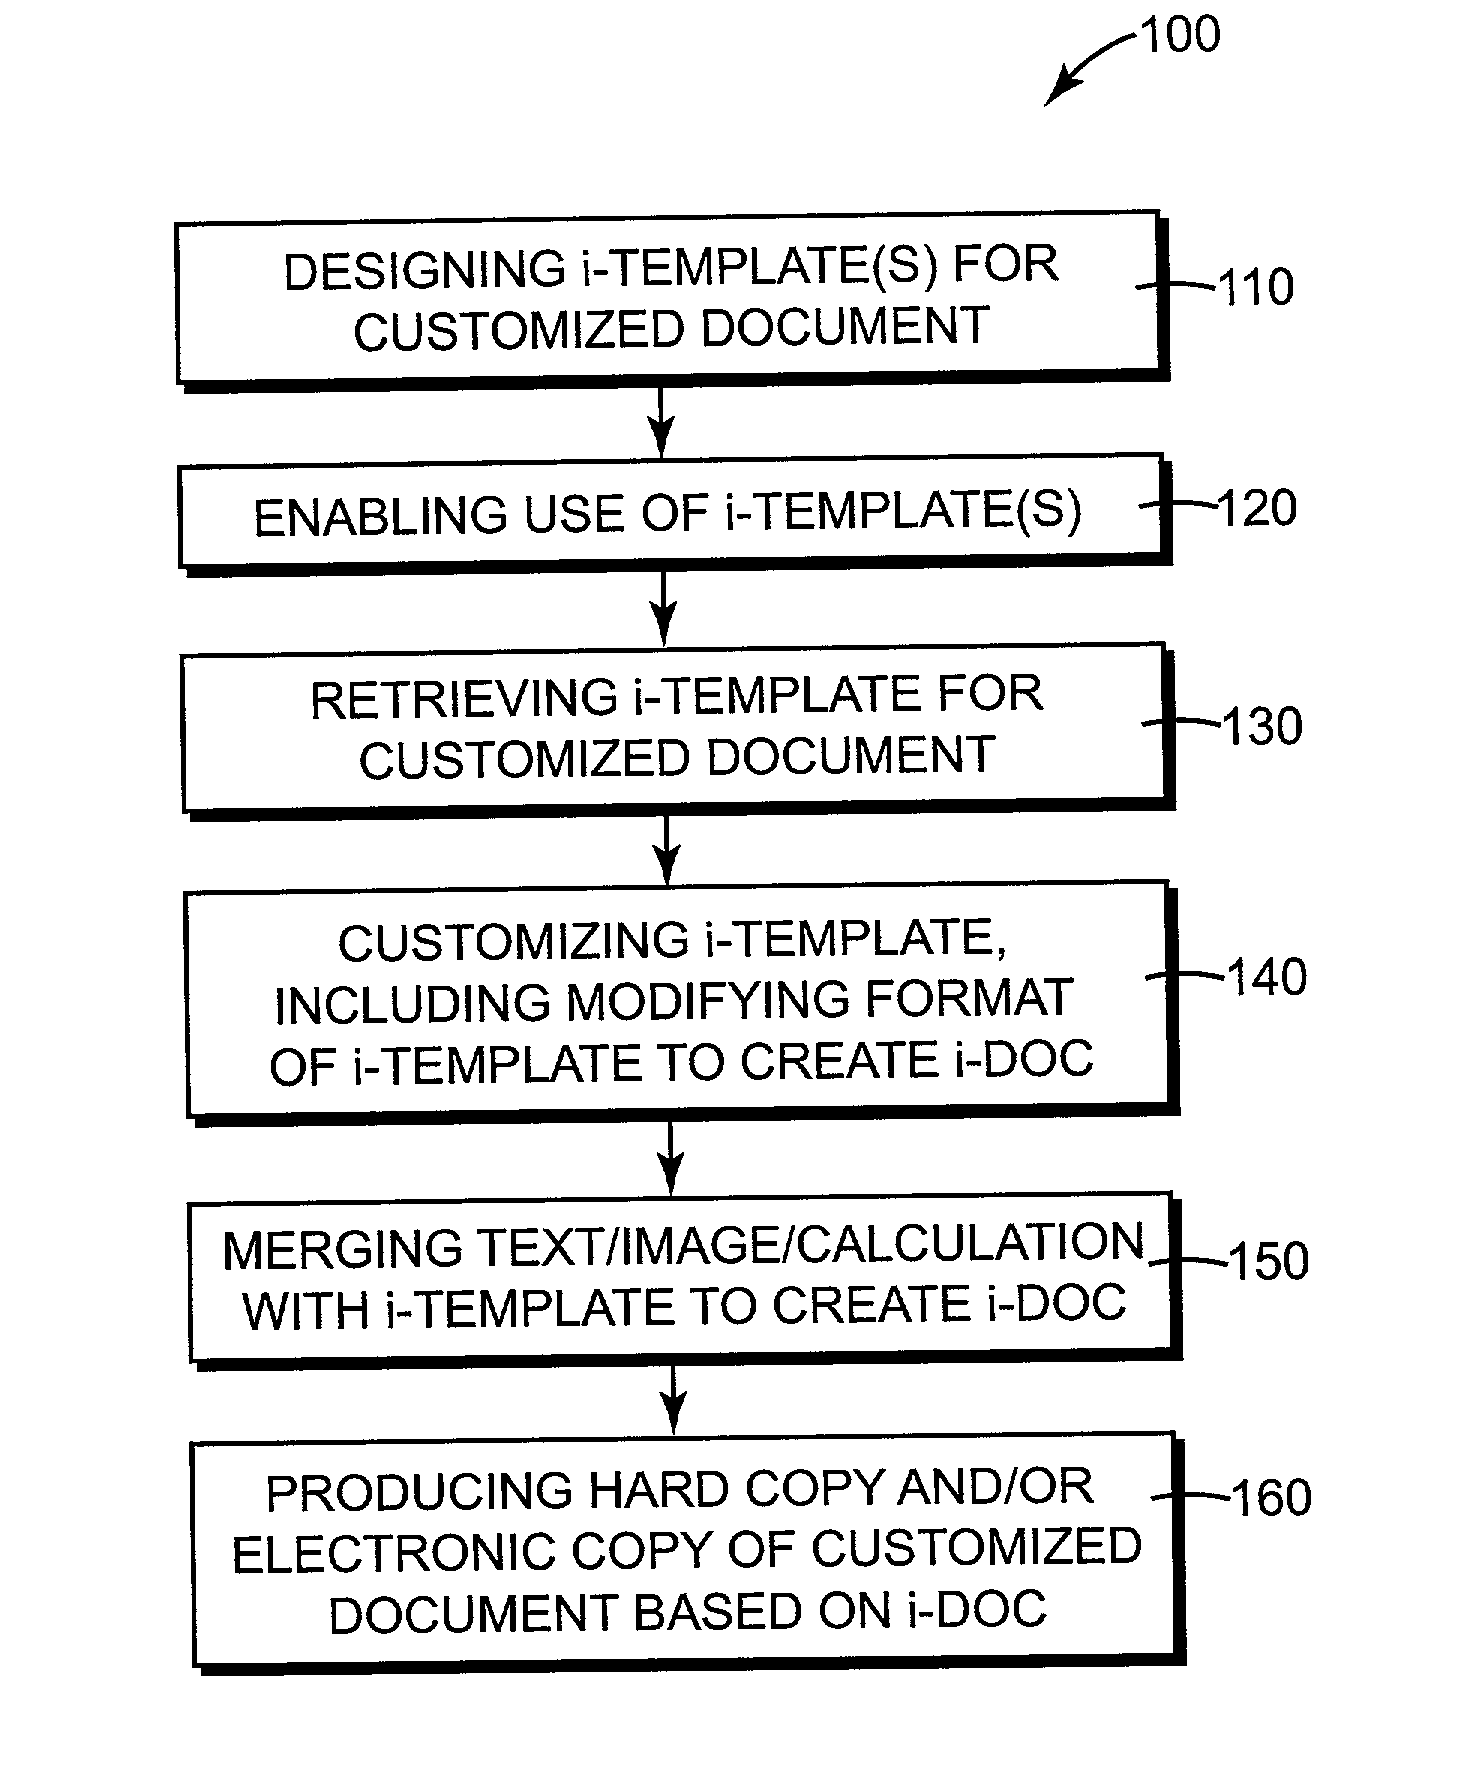 Point-of-need document production system and method